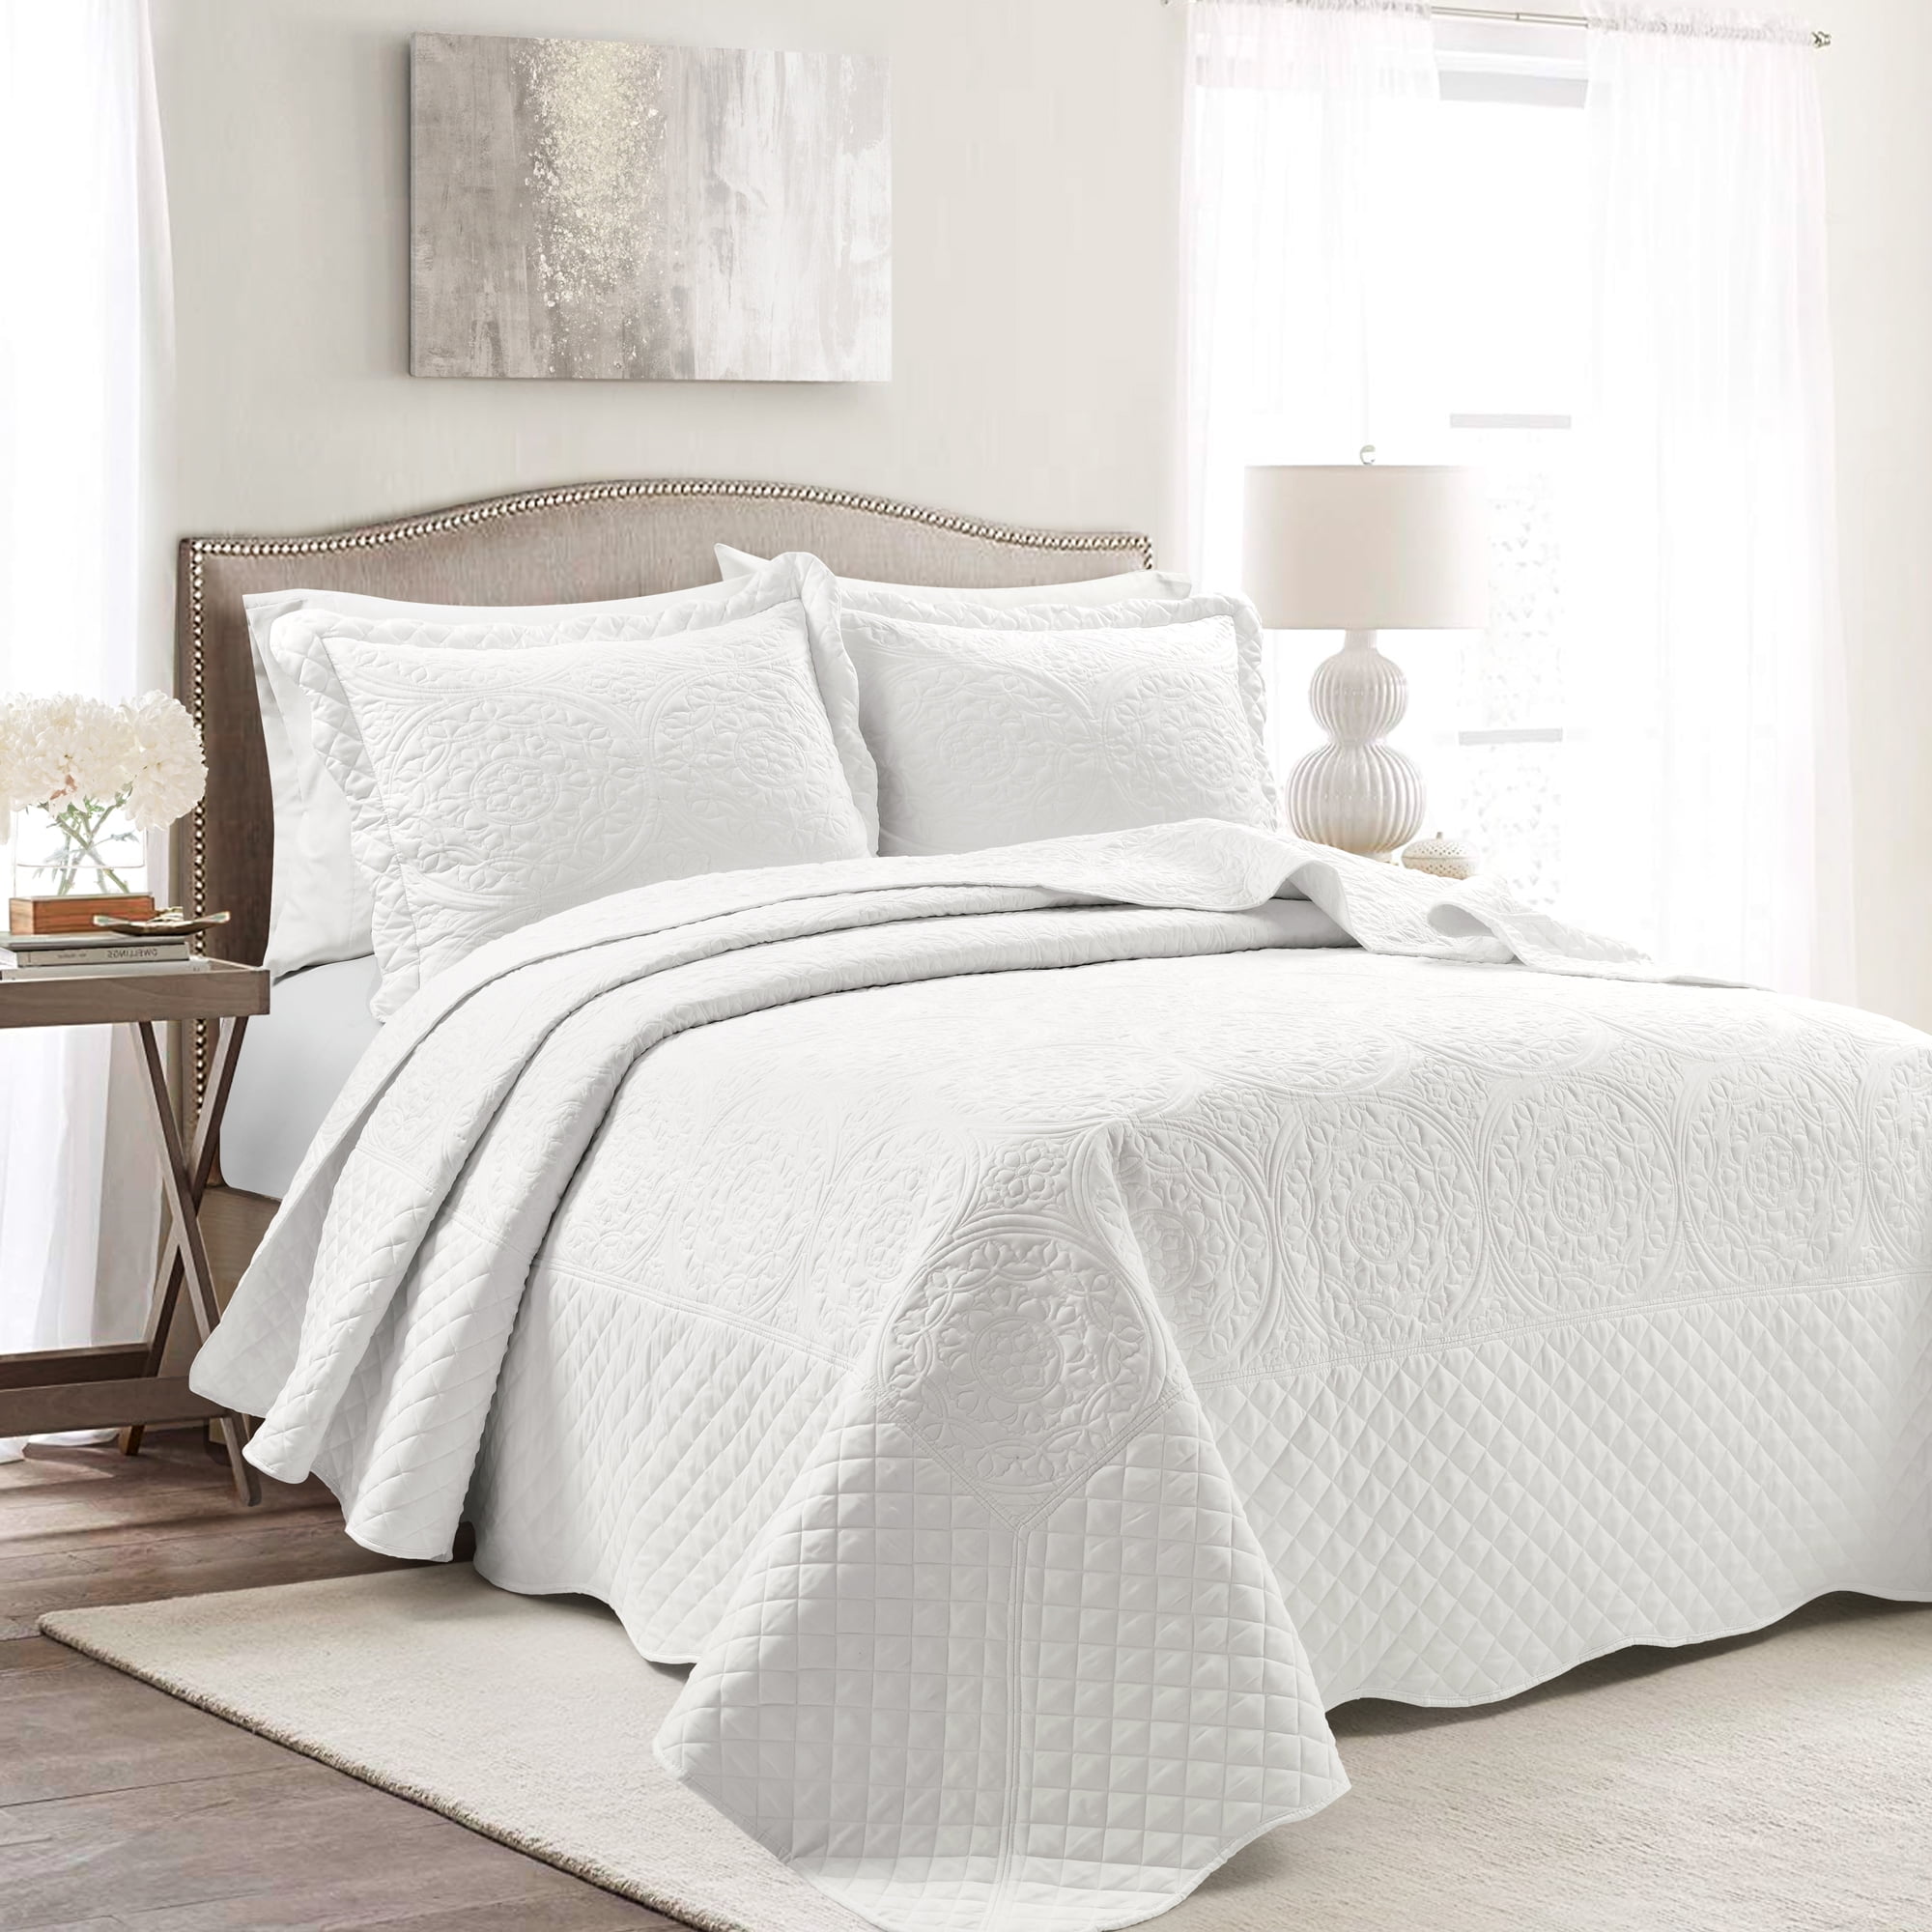 Quilt Set Off White Queen Bedding Scalloped Edge Comforter Bed Cover Shams 